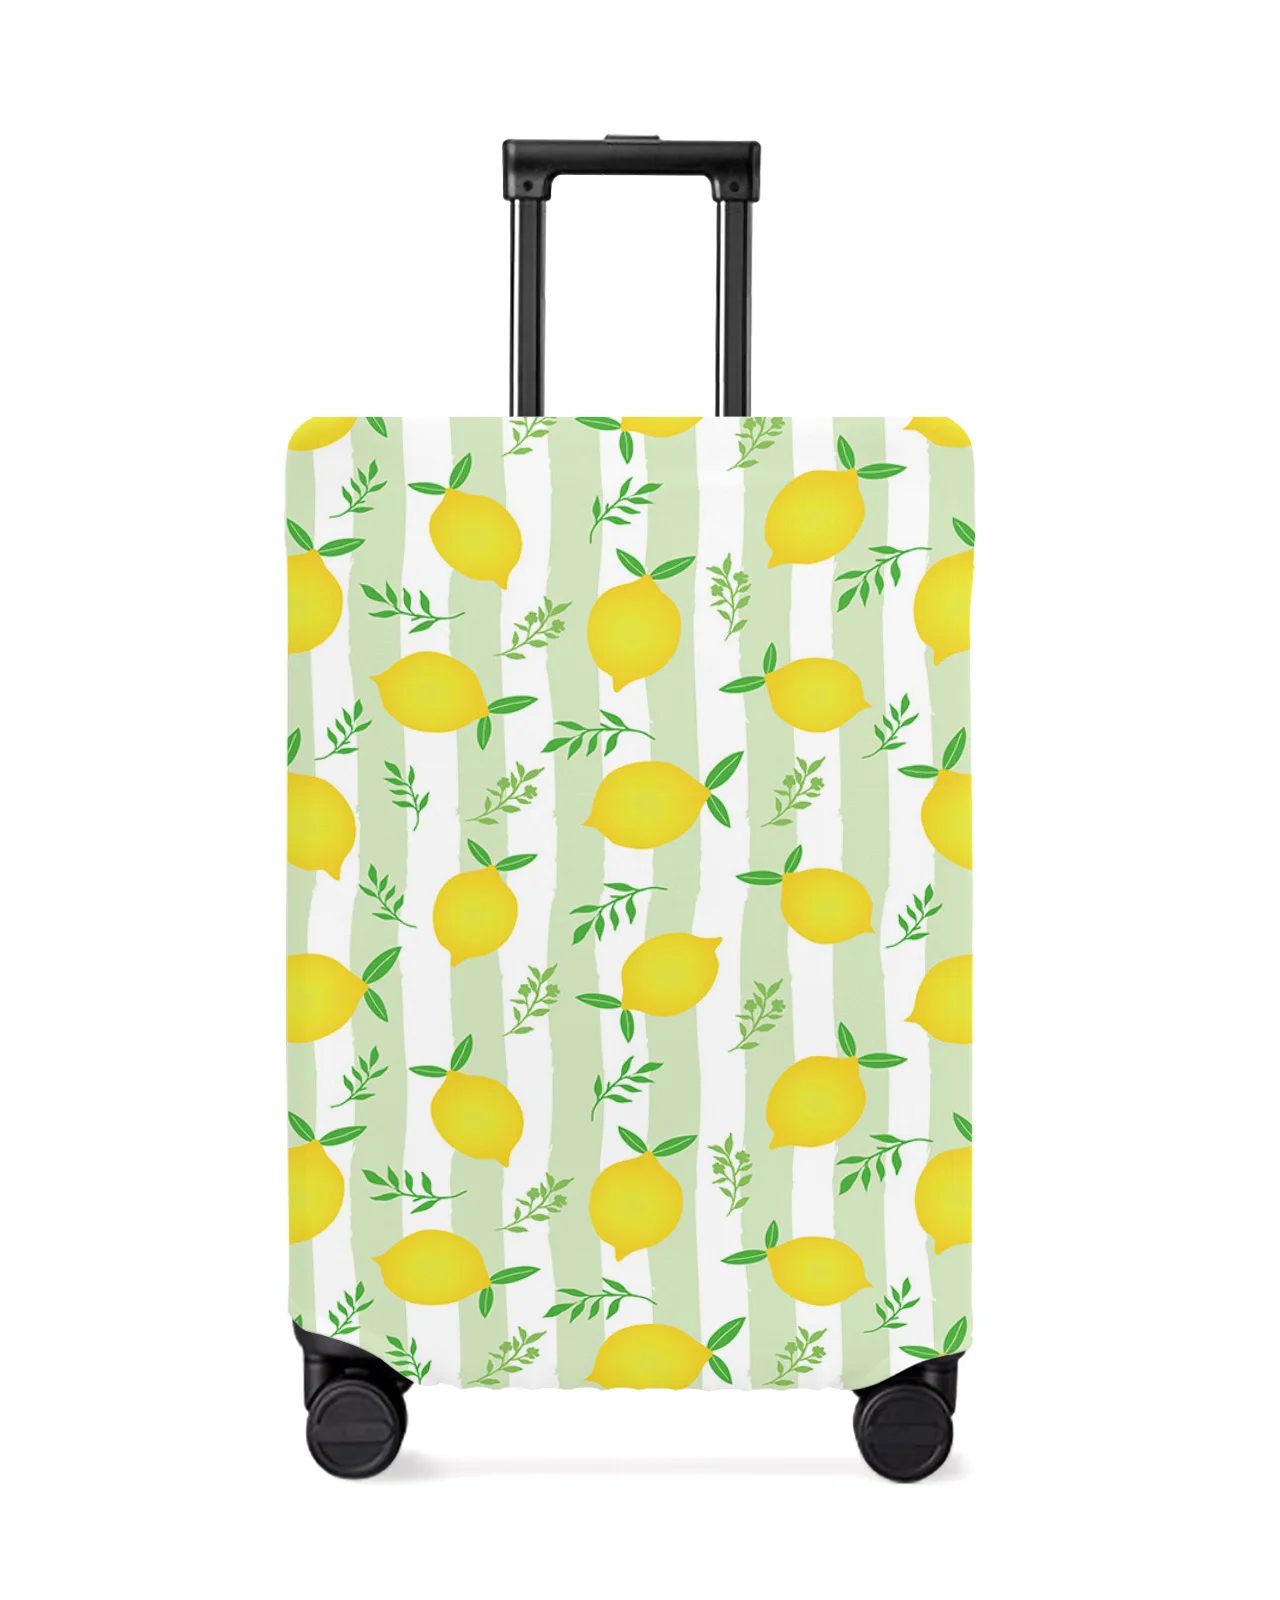 

Yellow Lemon Green Leaves Stripes Travel Luggage Cover Elastic Baggage Cover Suitcase Case Dust Cover Travel Accessories